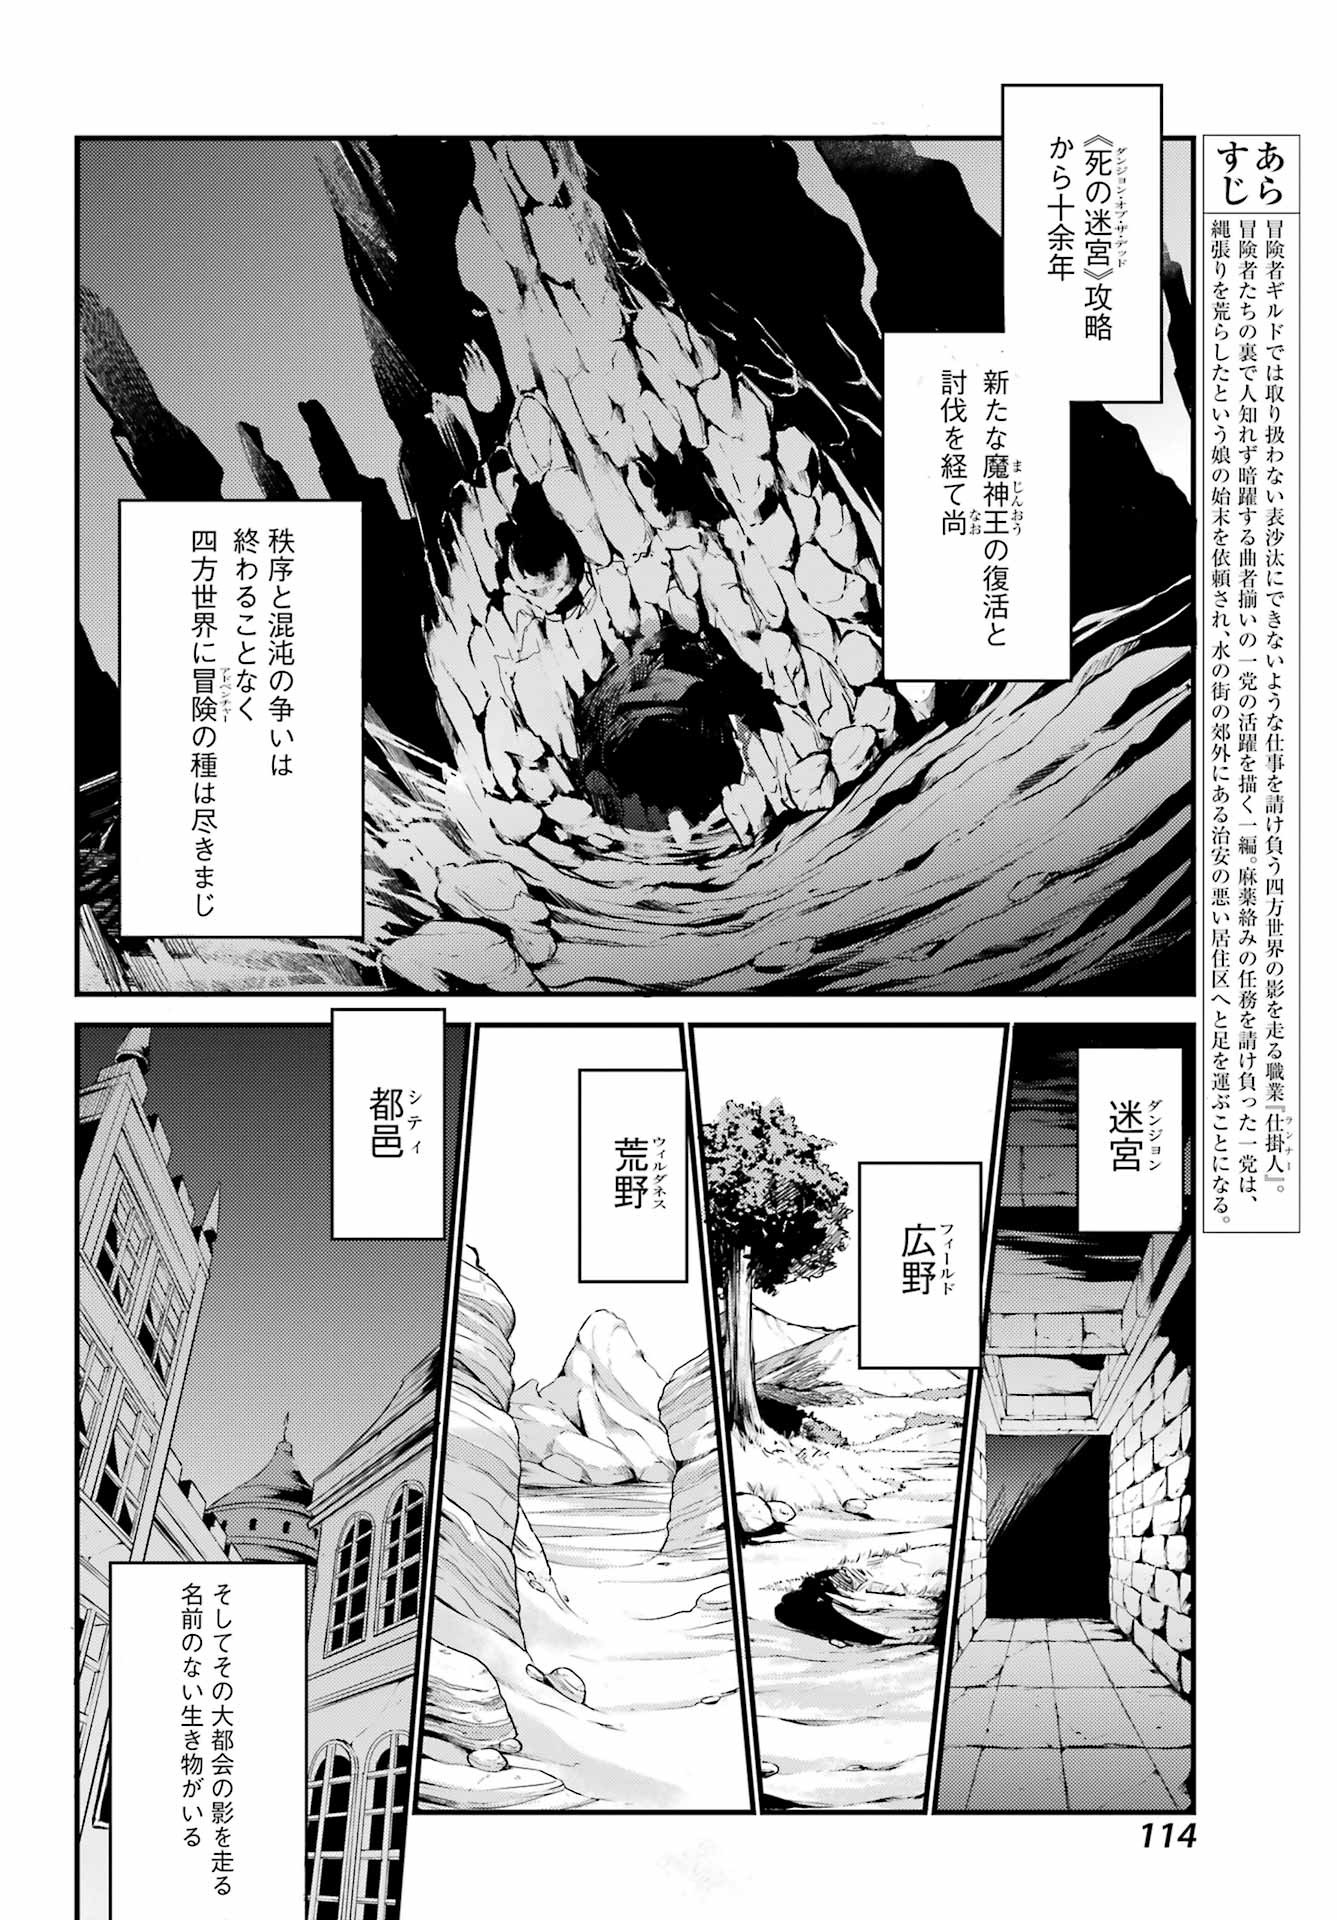 Goblin Slayer: Day in the Life - Chapter 08 - Page 2